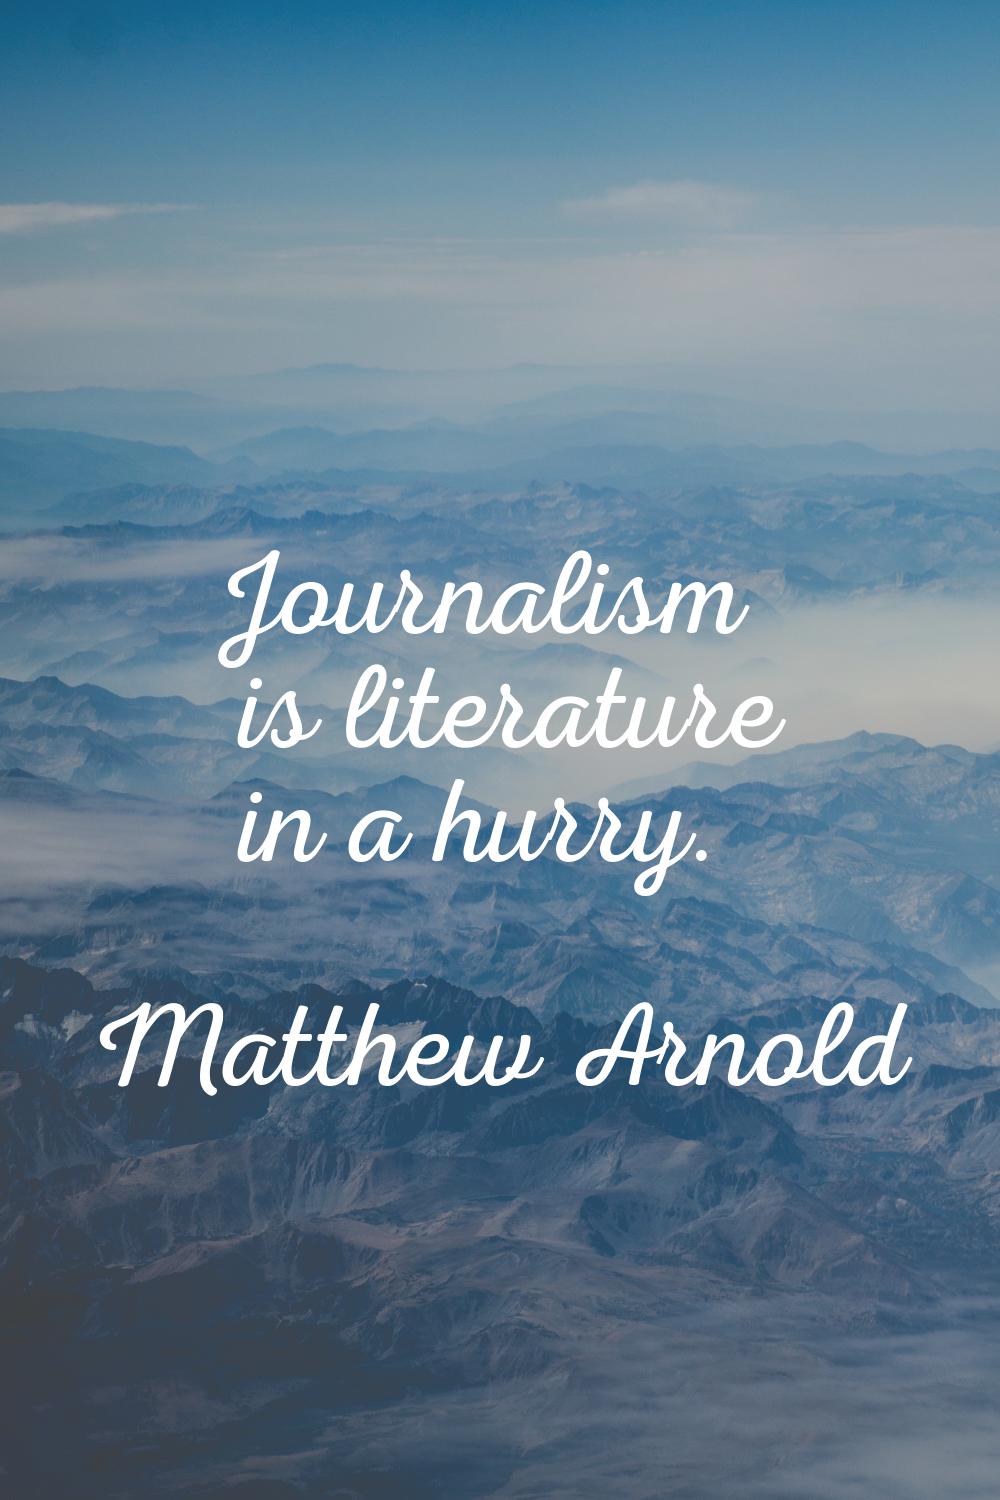 Journalism is literature in a hurry.